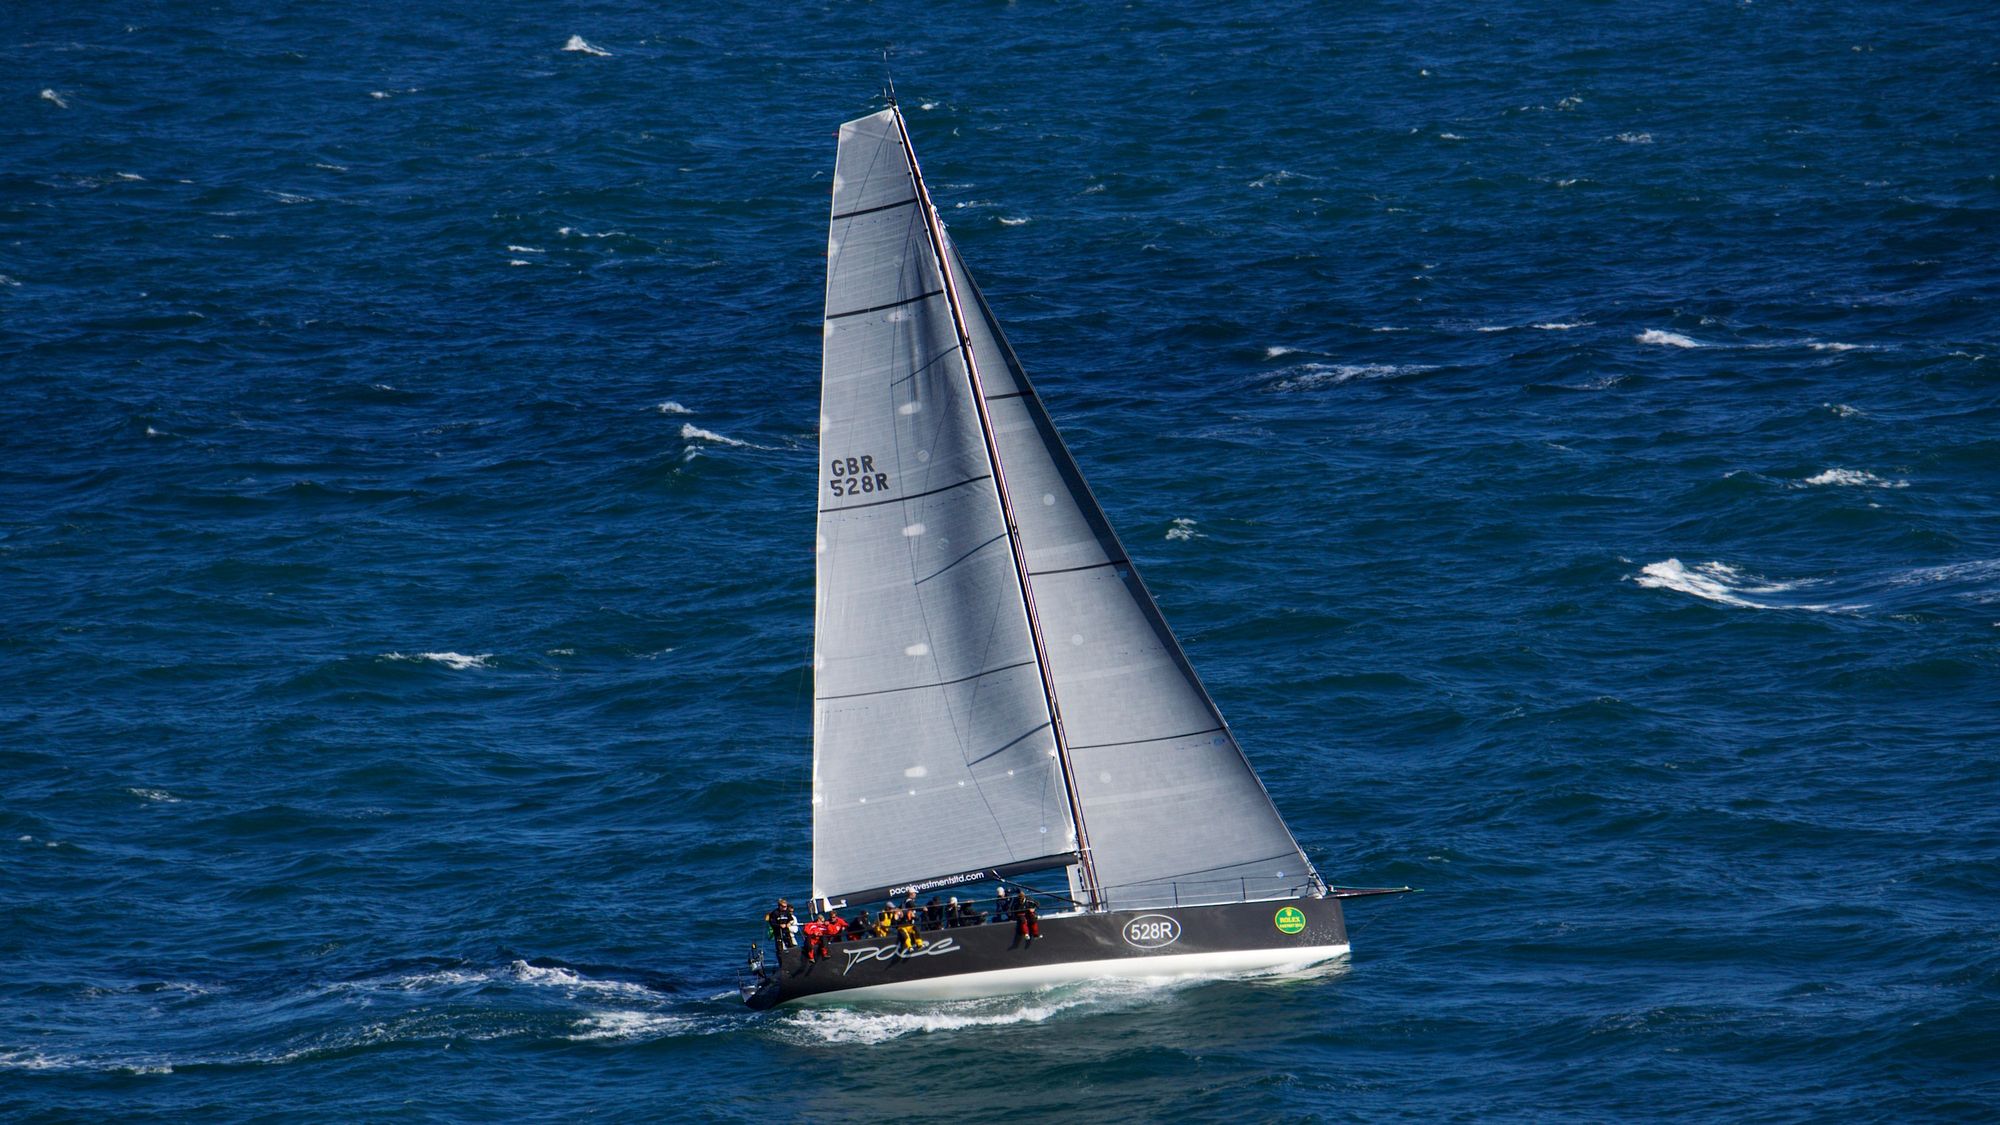 A sleek race boat with logos and the crew sitting on one side, sailing through blue water with whitecaps.